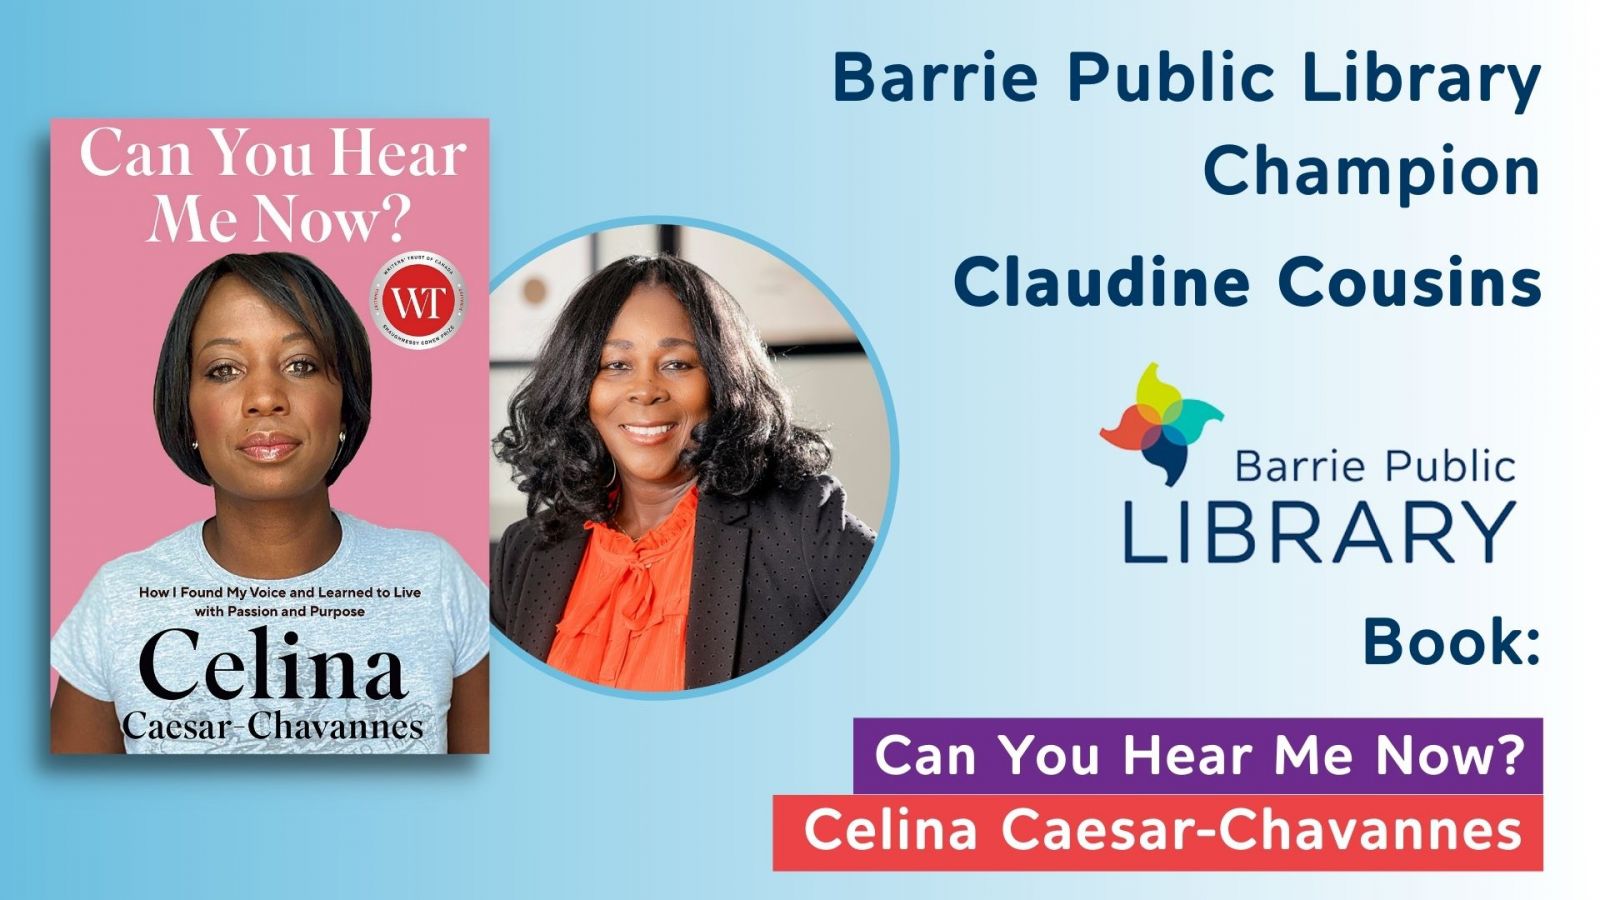 Can you hear me now? By Celina Caesar-Chavannes 